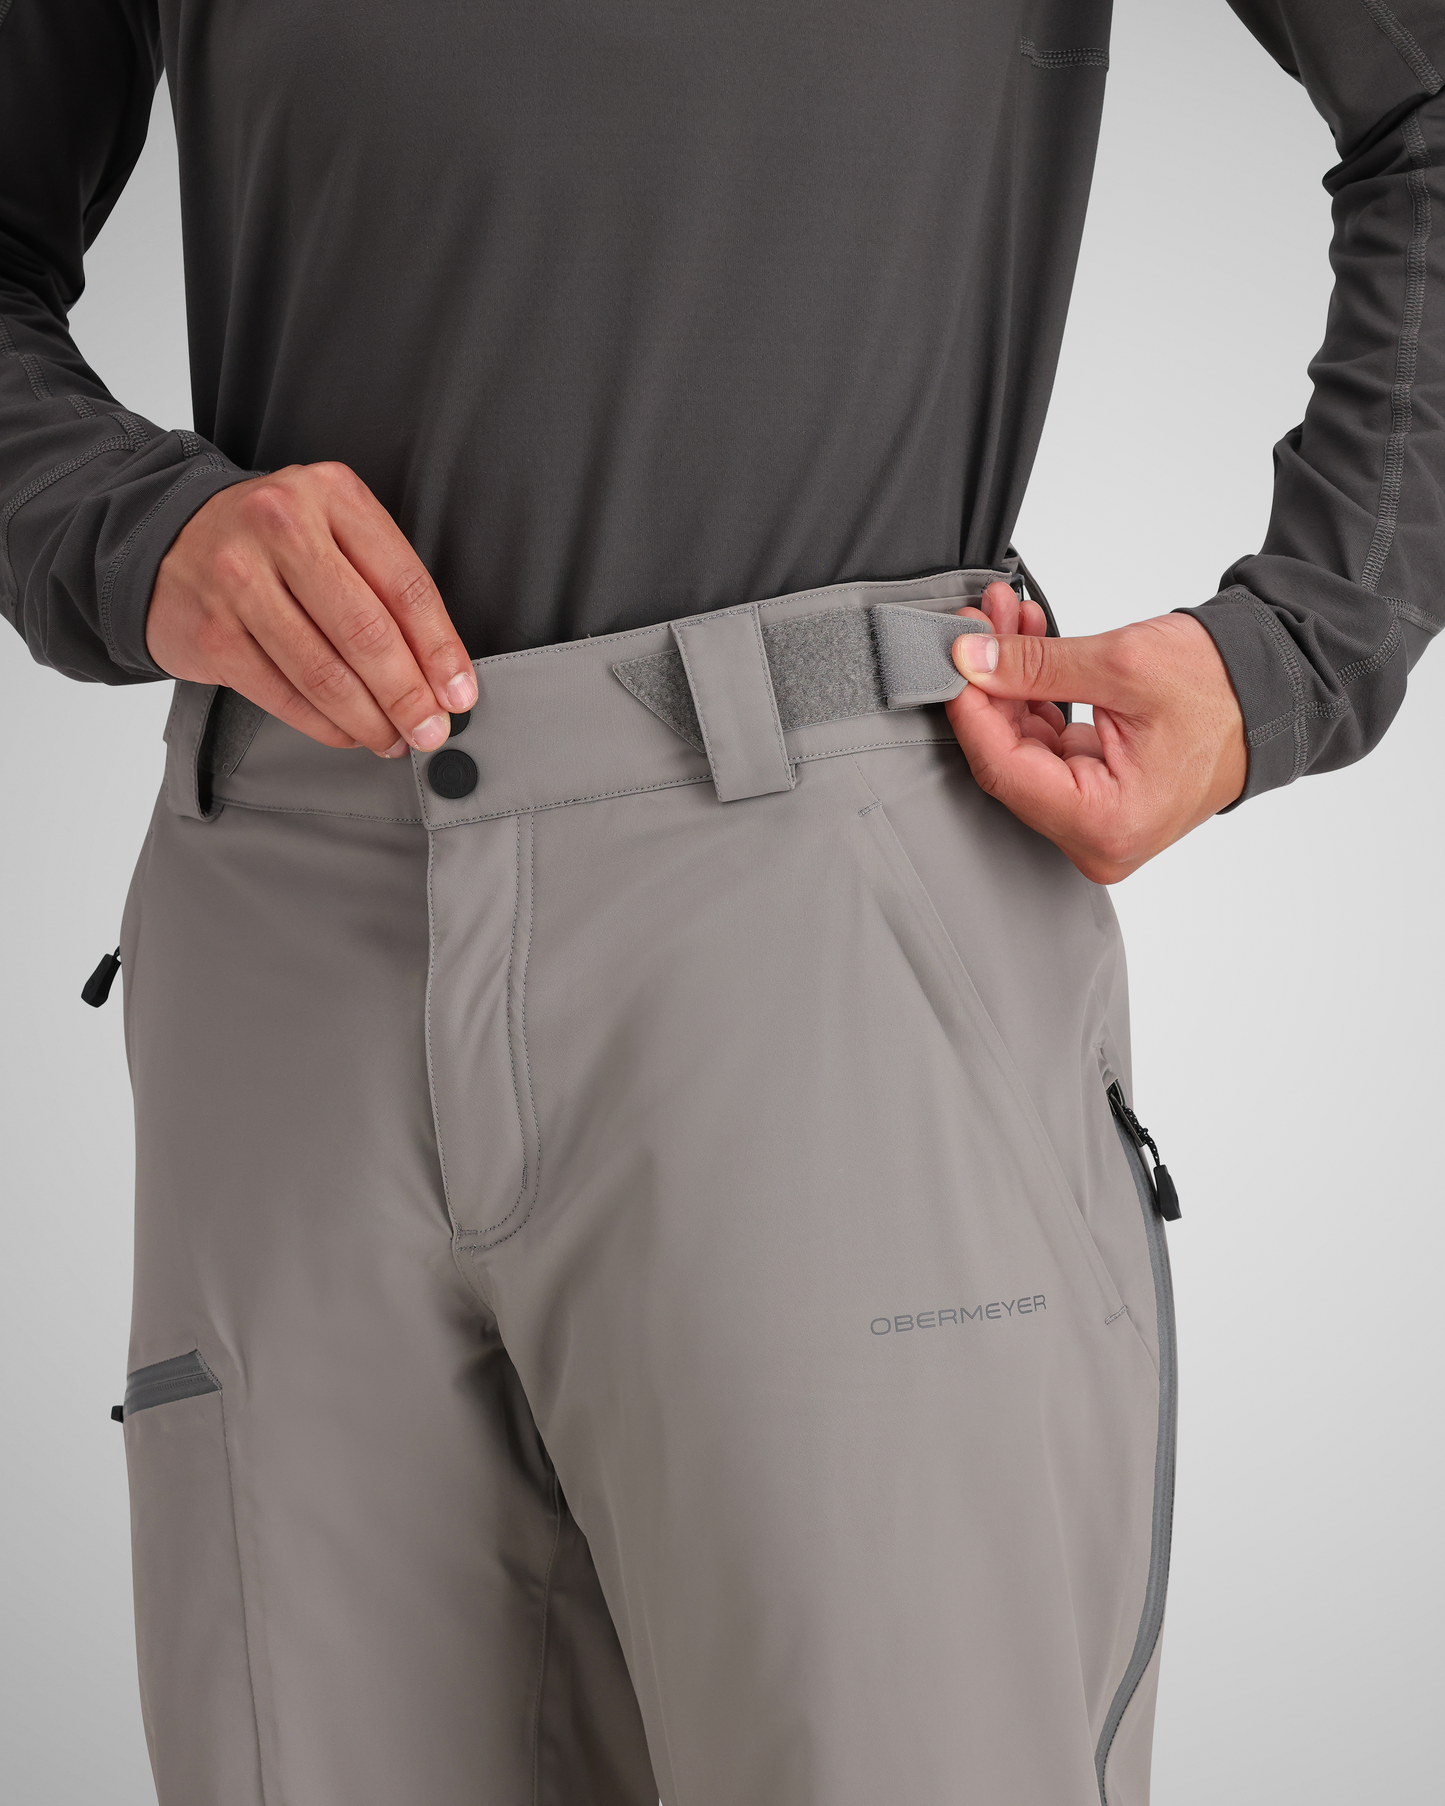 Adjustable waist | Precision fit to keep your pants and suspenders exactly where you need them.